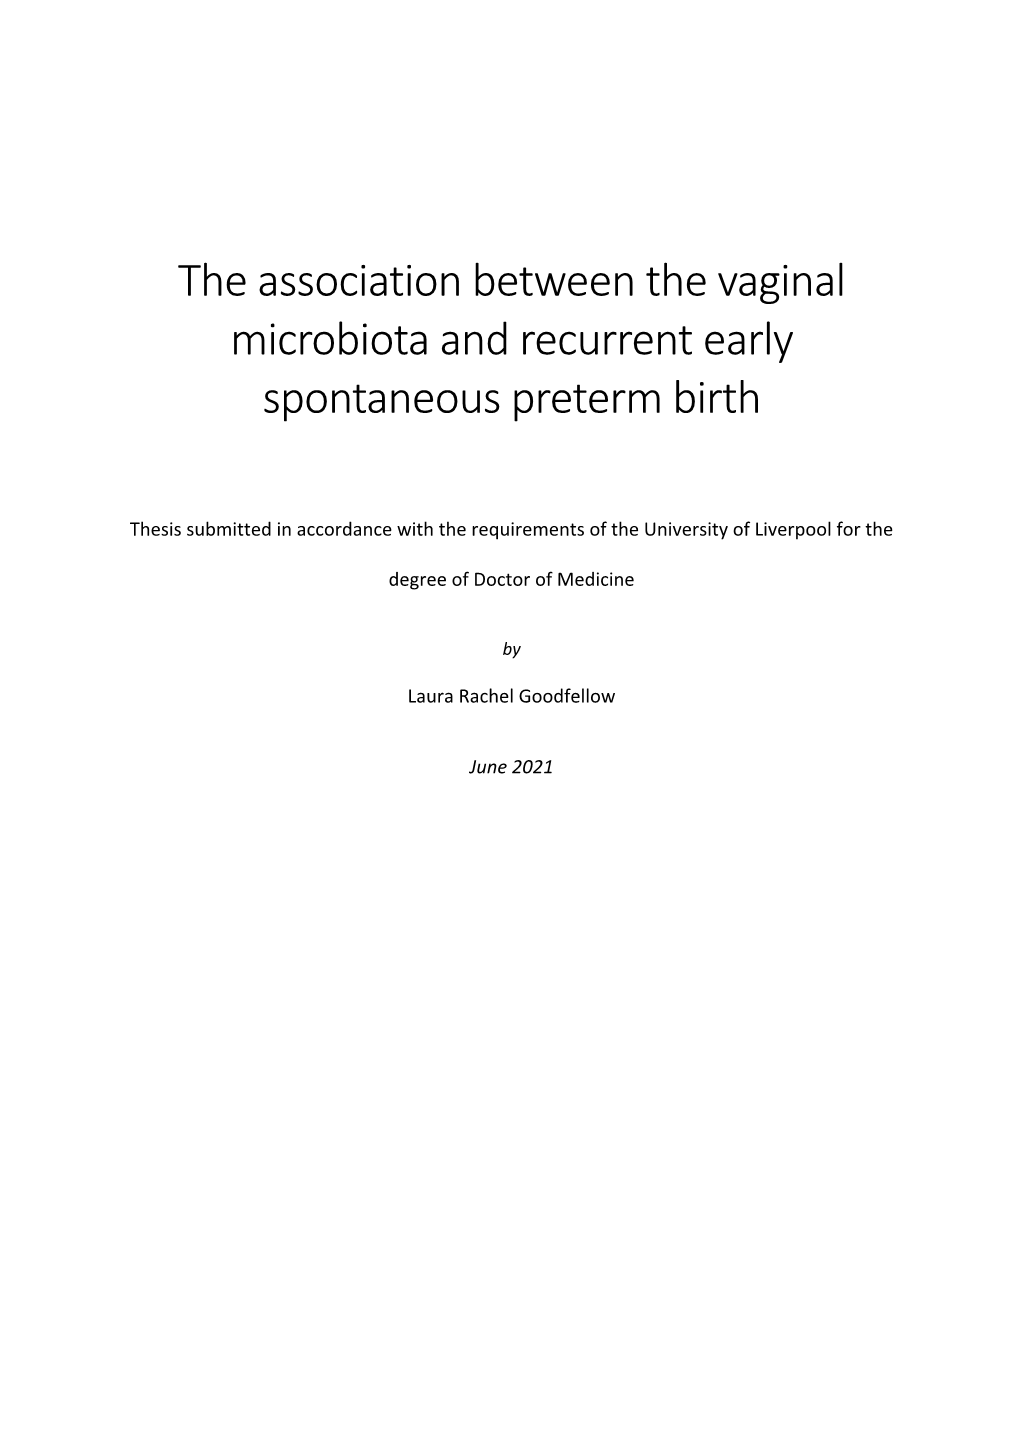 The Association Between the Vaginal Microbiota and Recurrent Early Spontaneous Preterm Birth